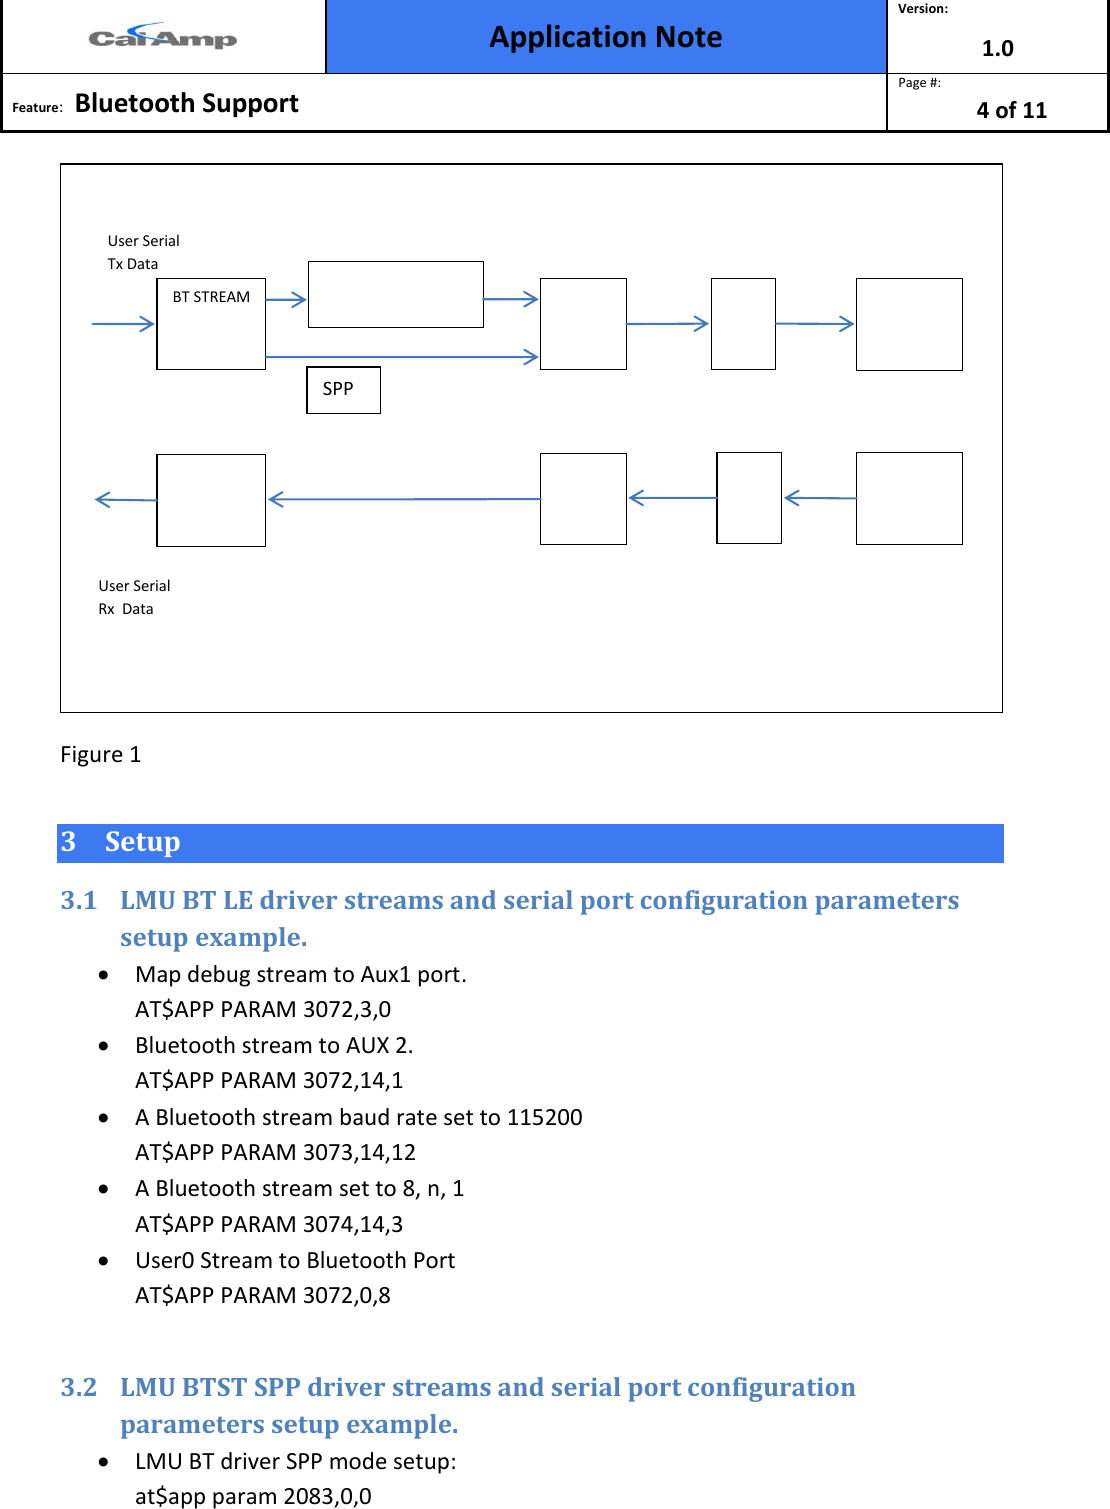  Application Note Version: 1.0  Feature:   Bluetooth Support  Page #: 4 of 11    Figure 1 3 Setup  3.1 LMU BT LE driver streams and serial port configuration parameters setup example.   Map debug stream to Aux1 port. AT$APP PARAM 3072,3,0  Bluetooth stream to AUX 2. AT$APP PARAM 3072,14,1  A Bluetooth stream baud rate set to 115200 AT$APP PARAM 3073,14,12  A Bluetooth stream set to 8, n, 1 AT$APP PARAM 3074,14,3  User0 Stream to Bluetooth Port AT$APP PARAM 3072,0,8  3.2 LMU BTST SPP driver streams and serial port configuration parameters setup example.   LMU BT driver SPP mode setup: at$app param 2083,0,0  User Serial  Tx Data BT STREAM BLE  “AT cmd” Parser BT_DRV  BT_ Sensor BT_ Sensor BT_DRV  BT STREAM User Serial Rx  Data BTCS BTCS SPP 